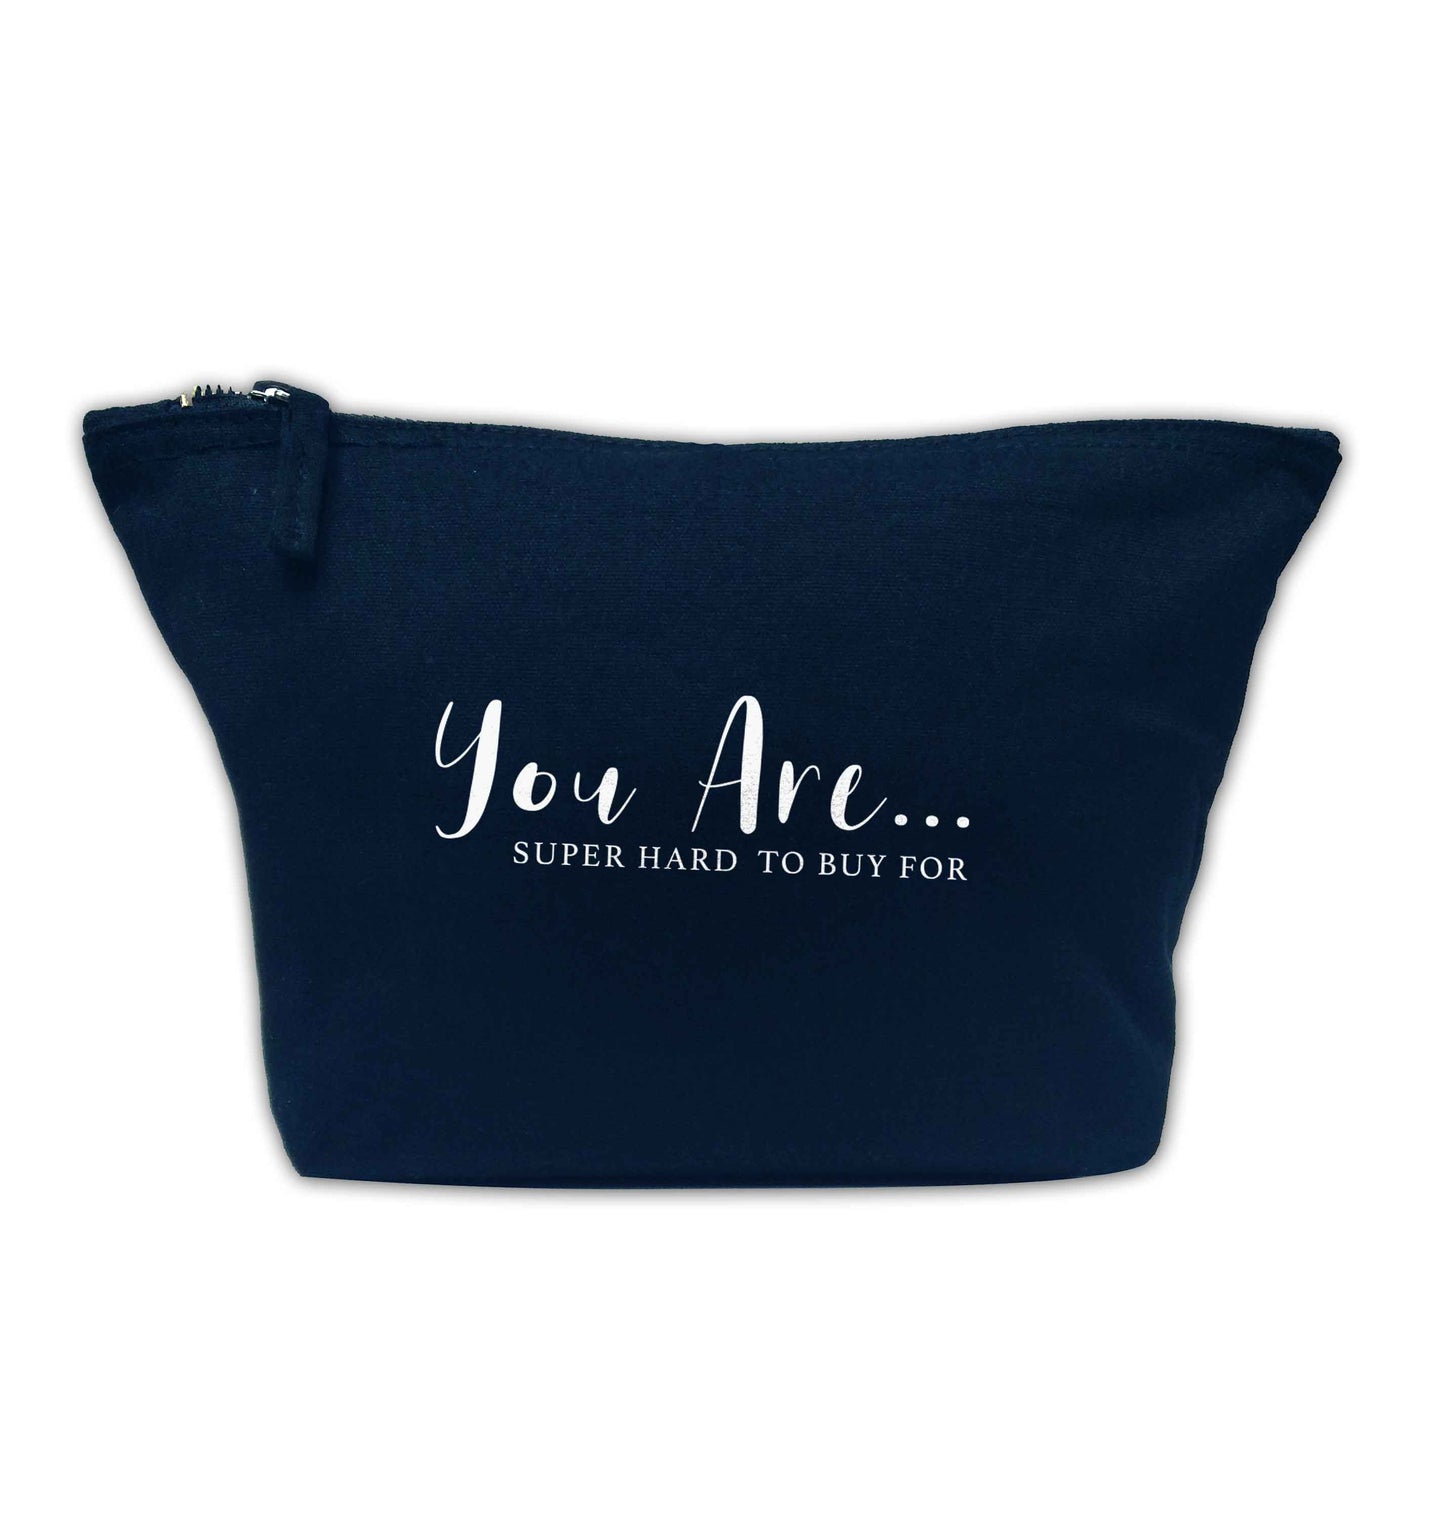 You are super hard to buy for navy makeup bag